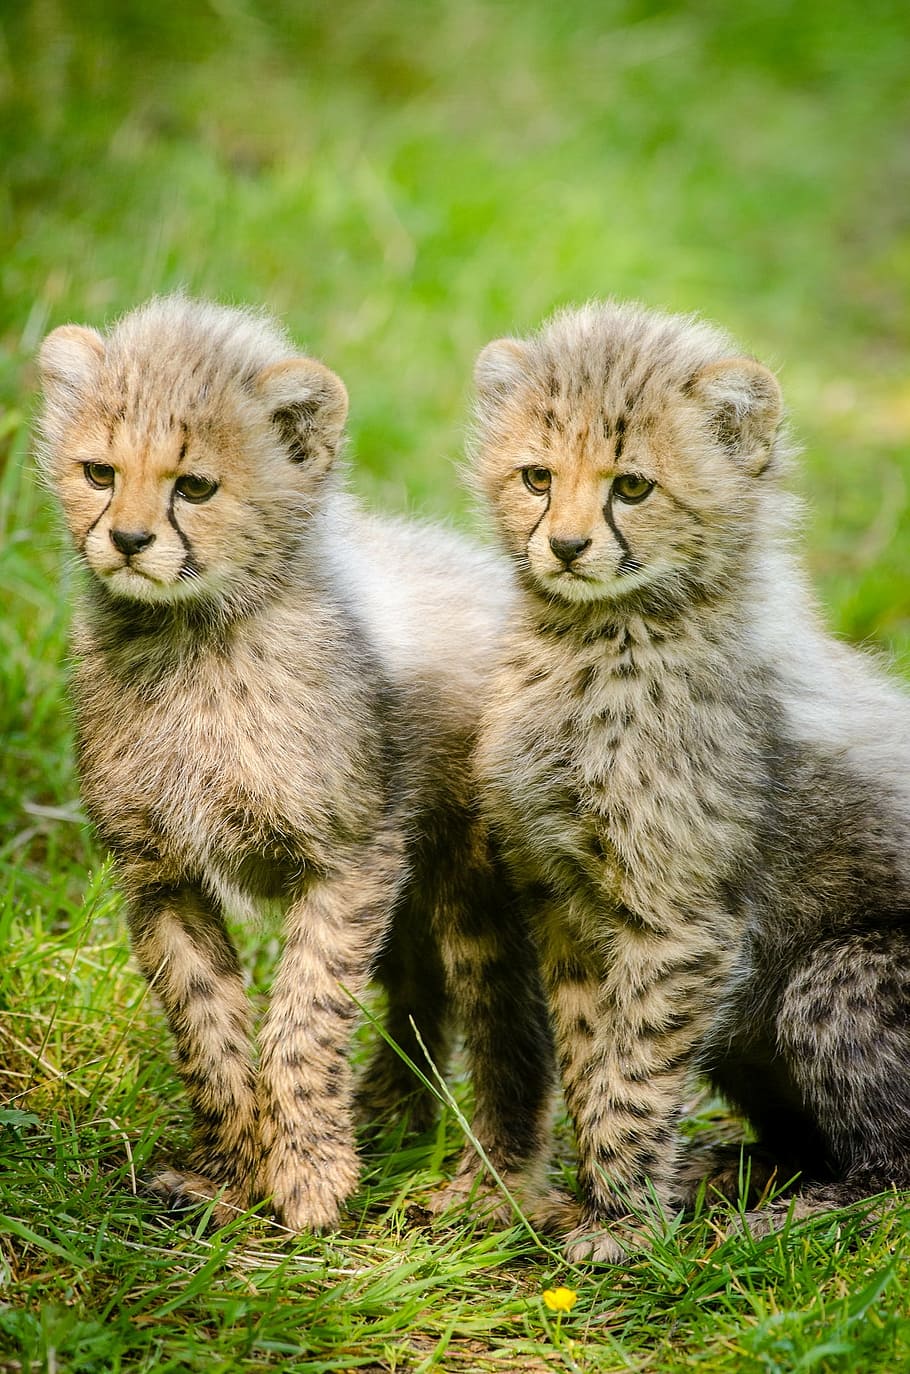 two baby cheetahs, cheetahs, cubs, two, together, big cats, africa, wild, nature, carnivore